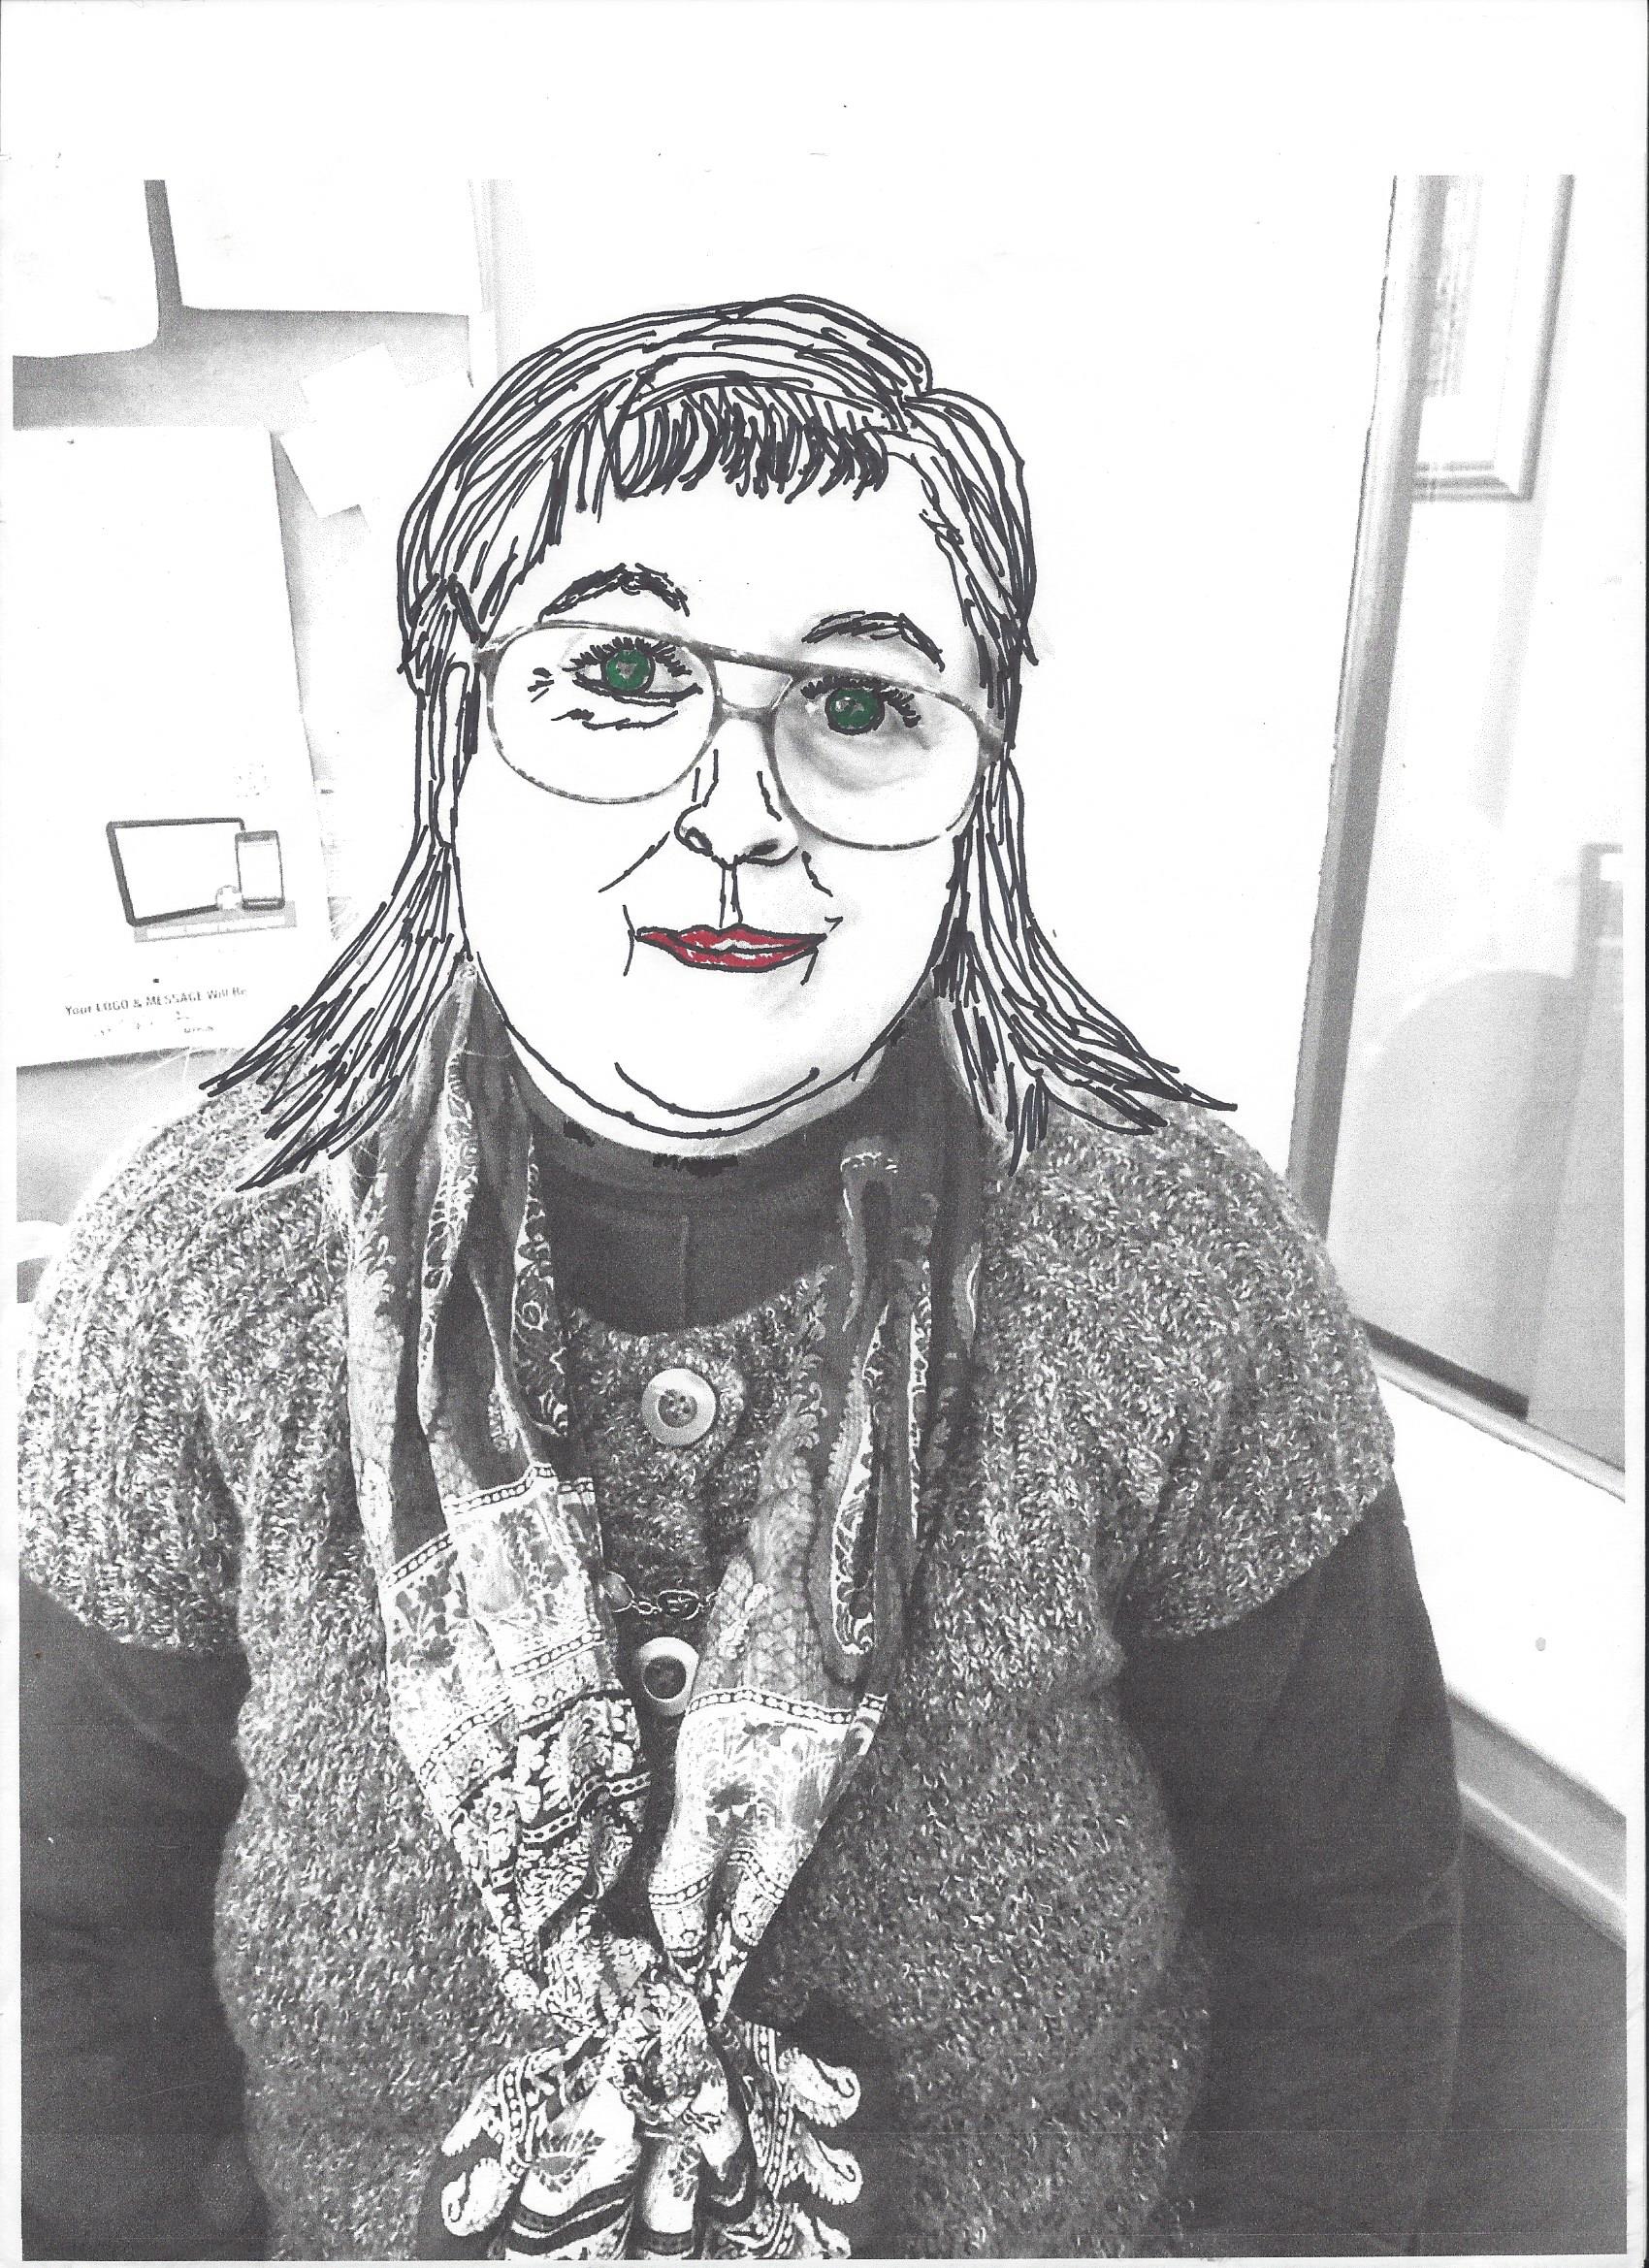 pict-self-portrait, pen and ink by Cheryl Freier